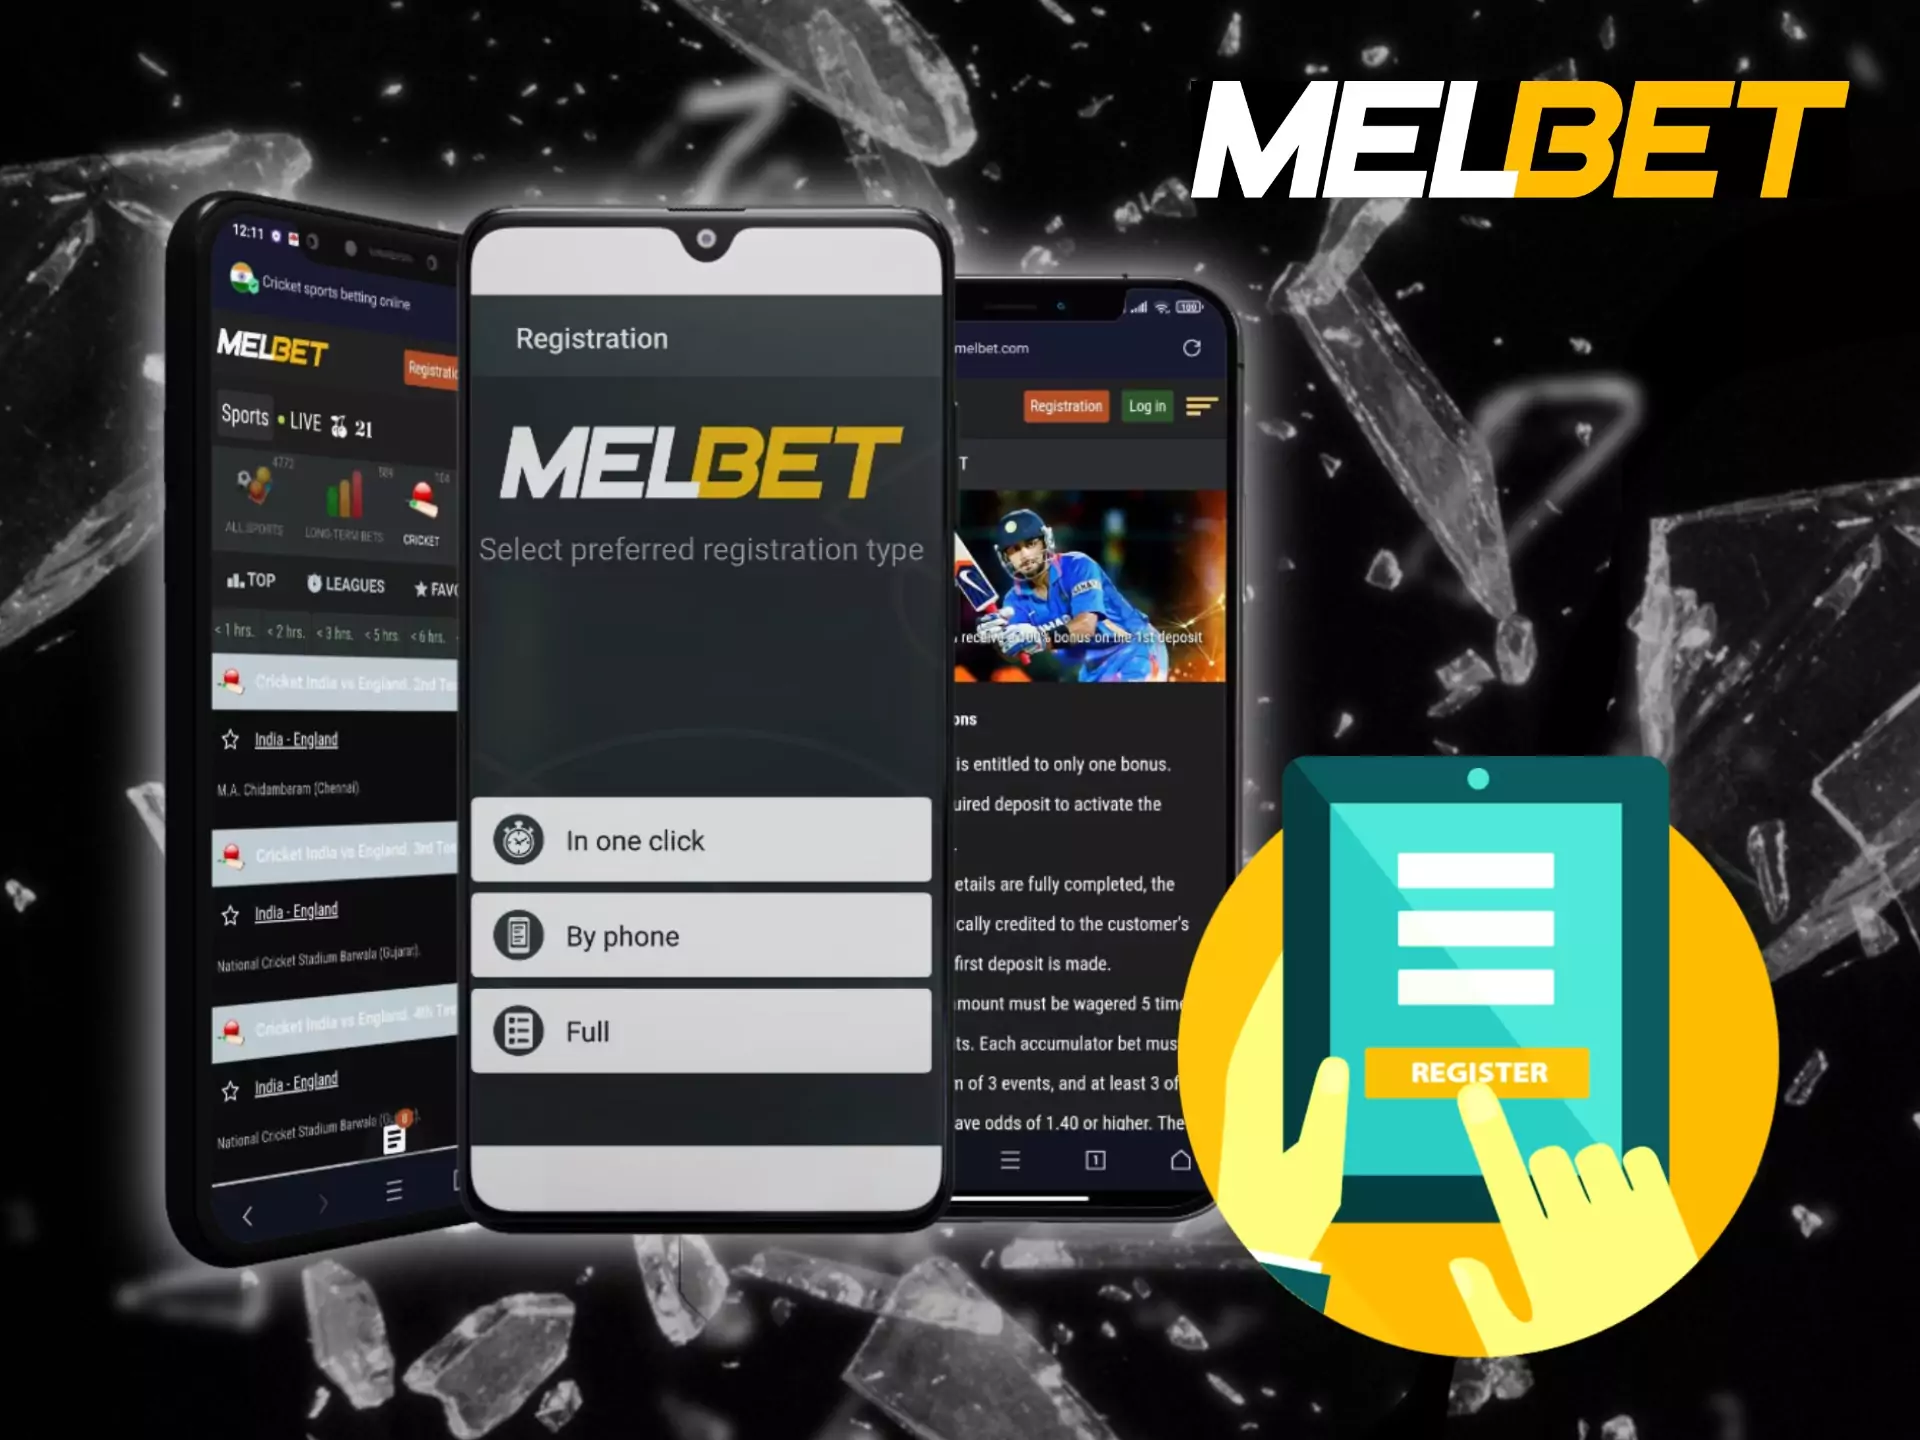 You can download the Melbet app and create your account via mobile phone.